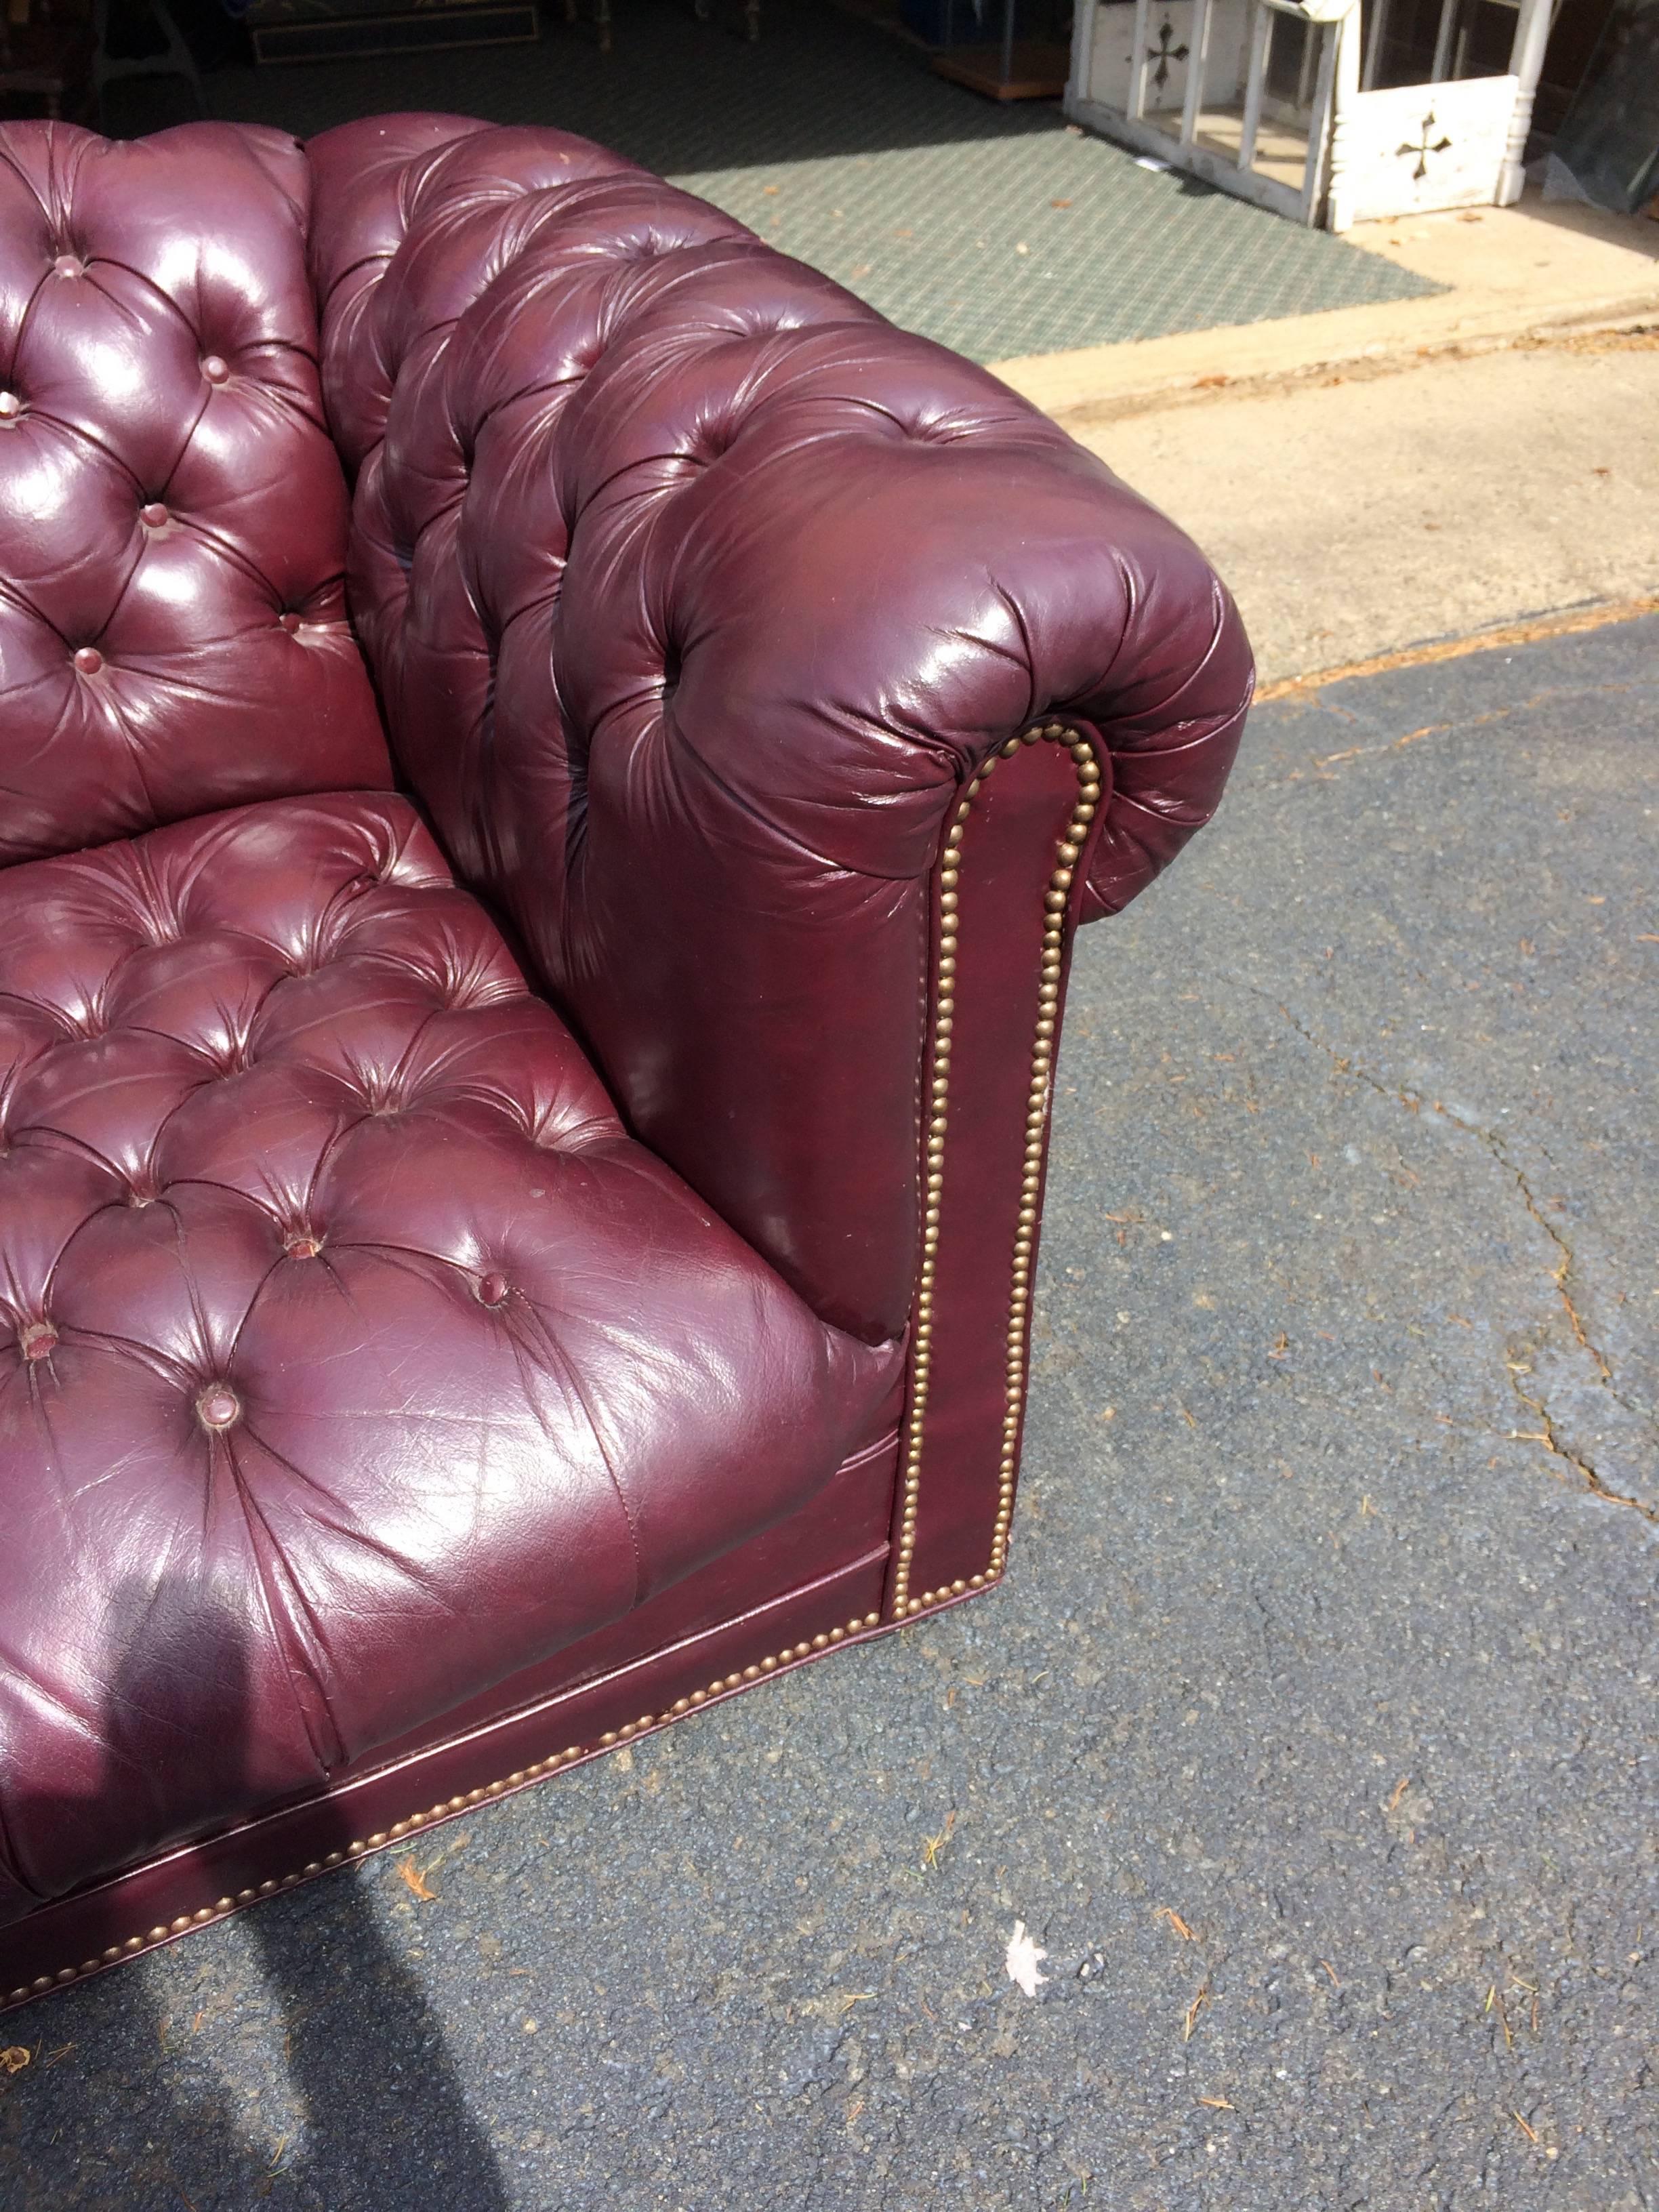 Rich Eggplant Leather Vintage Tufted Chesterfield Sofa 1